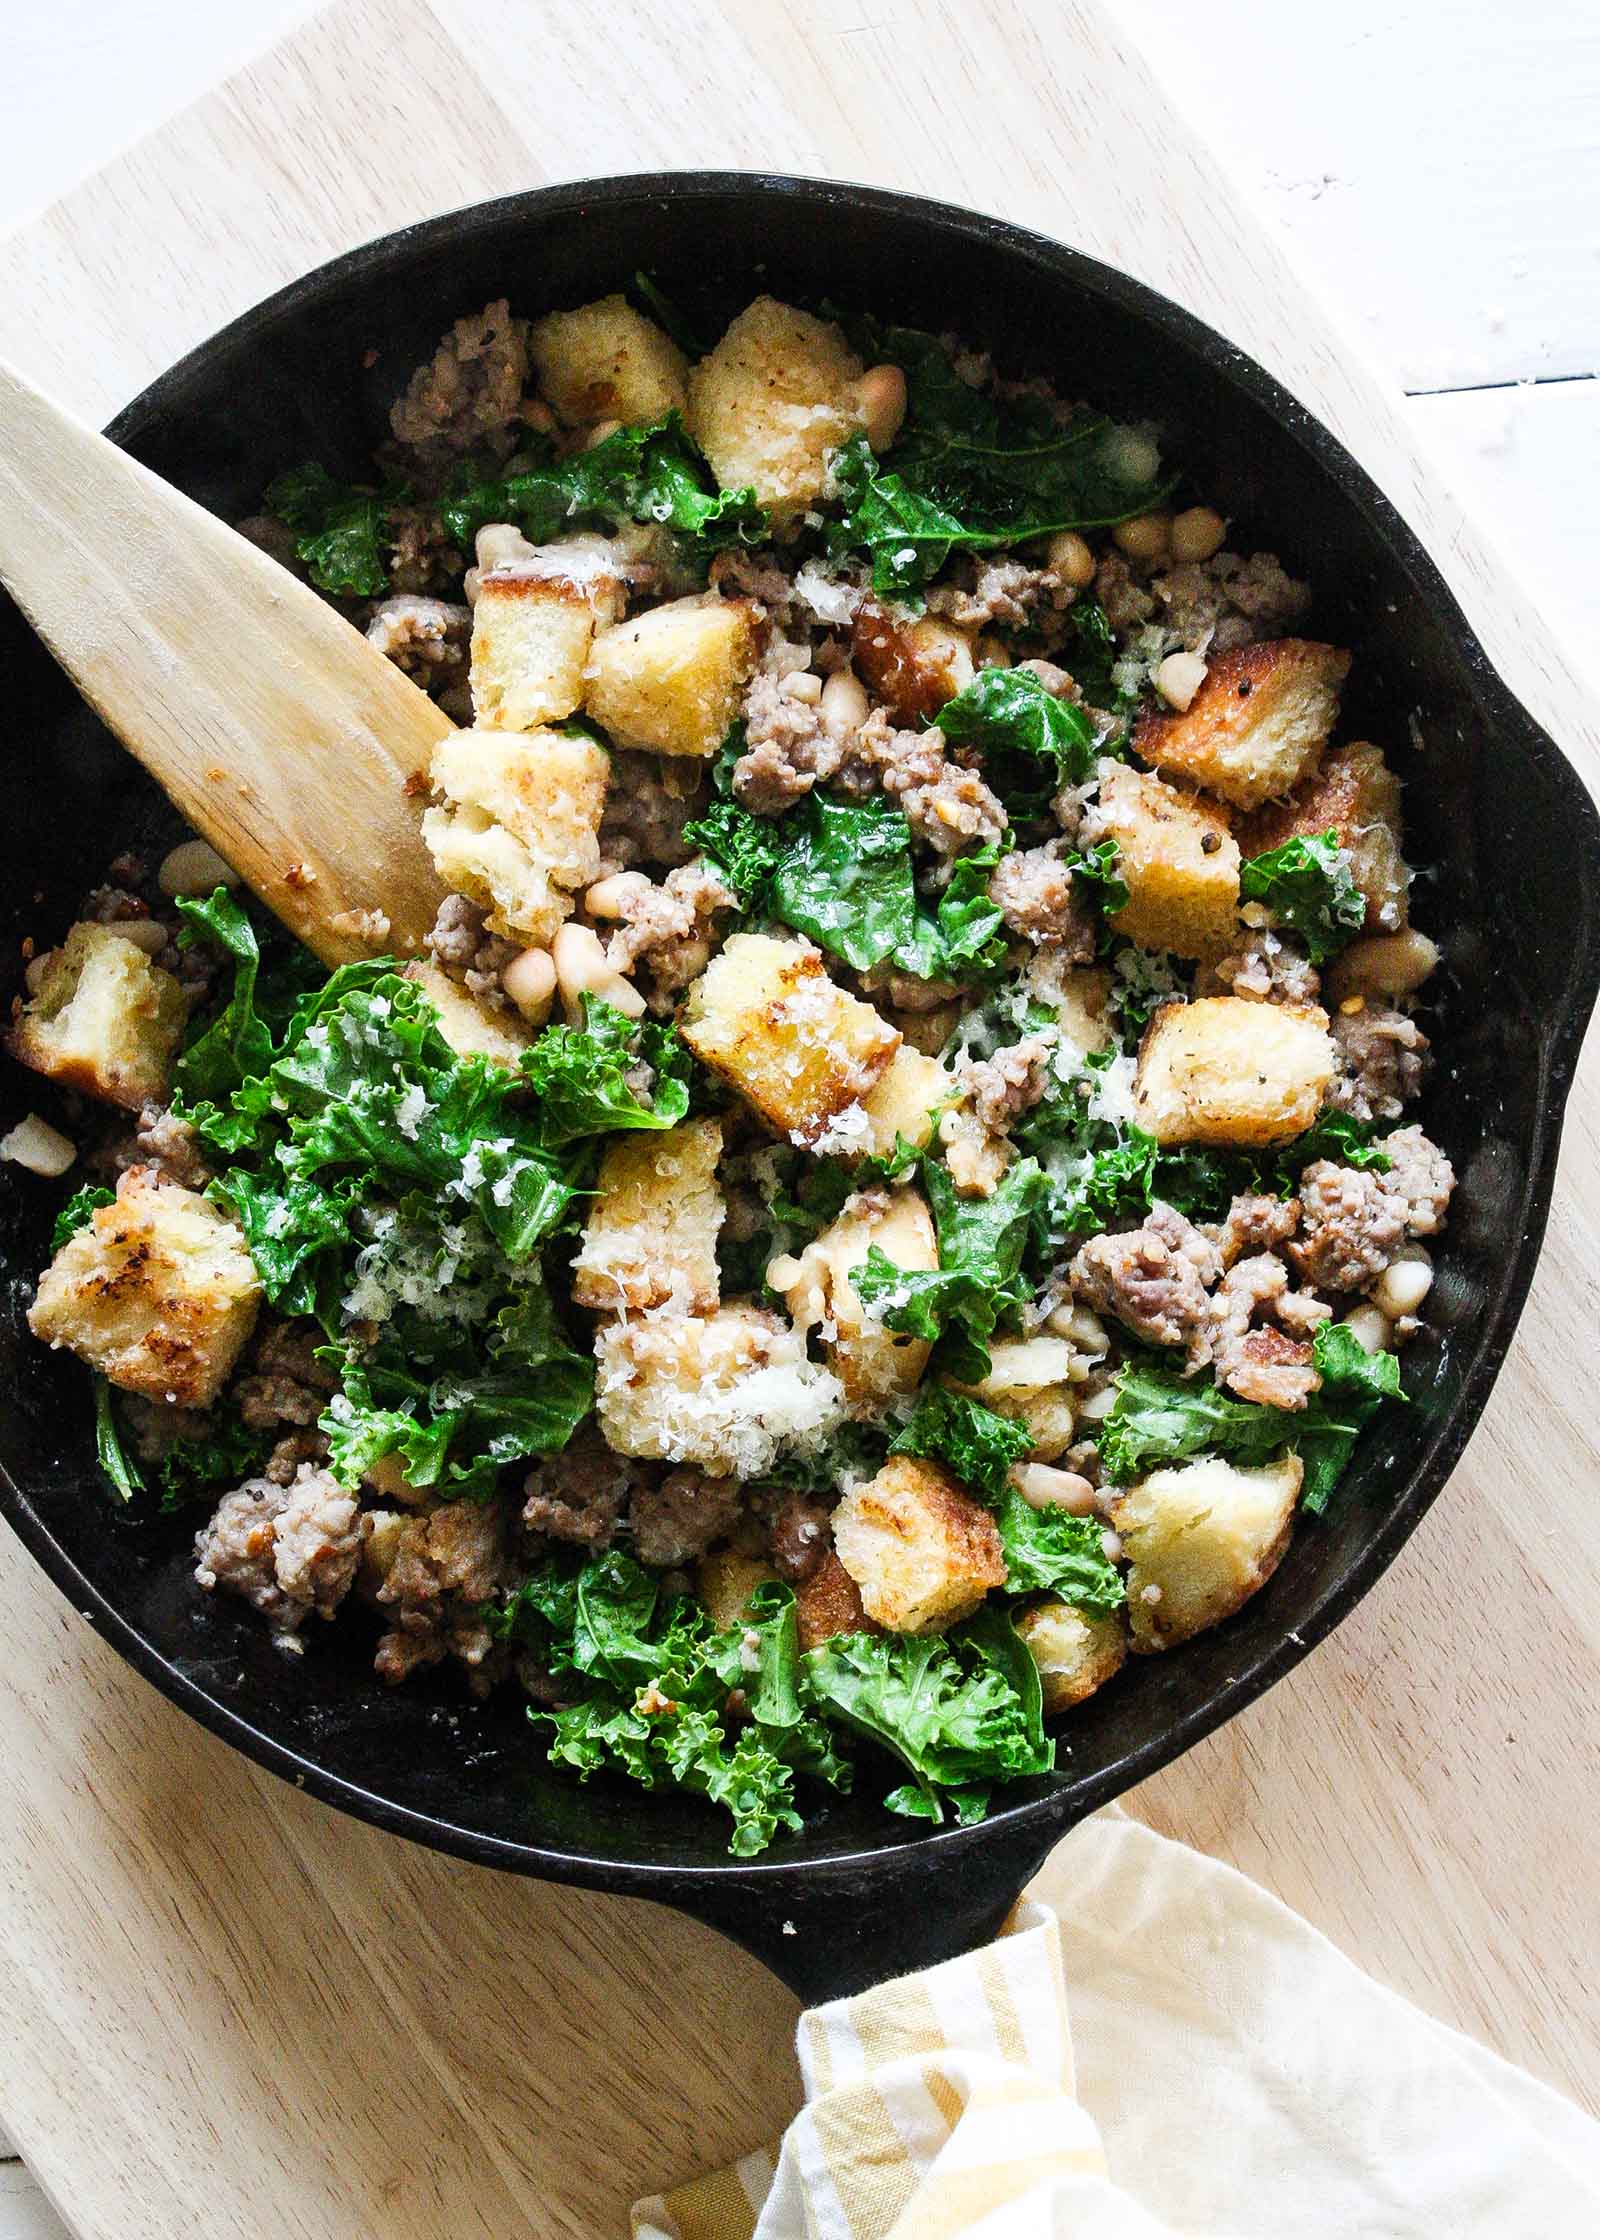 Budget-friendly dinners: Quick Sausage, Kale, and White Bean Skillet | Smitten Kitchen Everyday via Simply Recipes